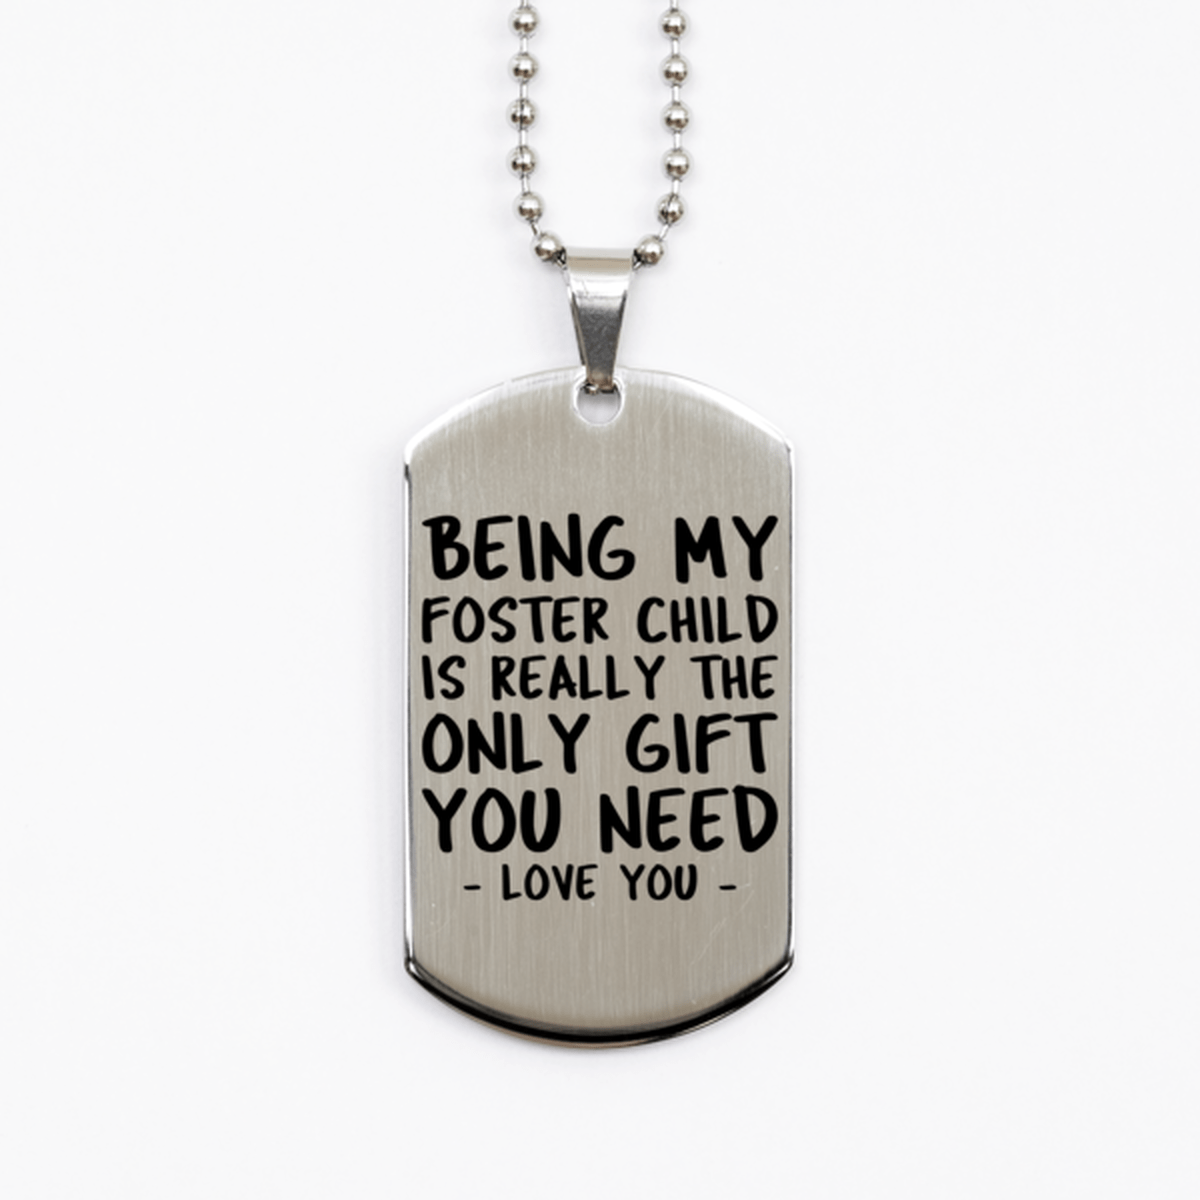 Funny Foster Child Silver Dog Tag Necklace, Being My Foster Child Is Really the Only Gift You Need, Best Birthday Gifts for Foster Child